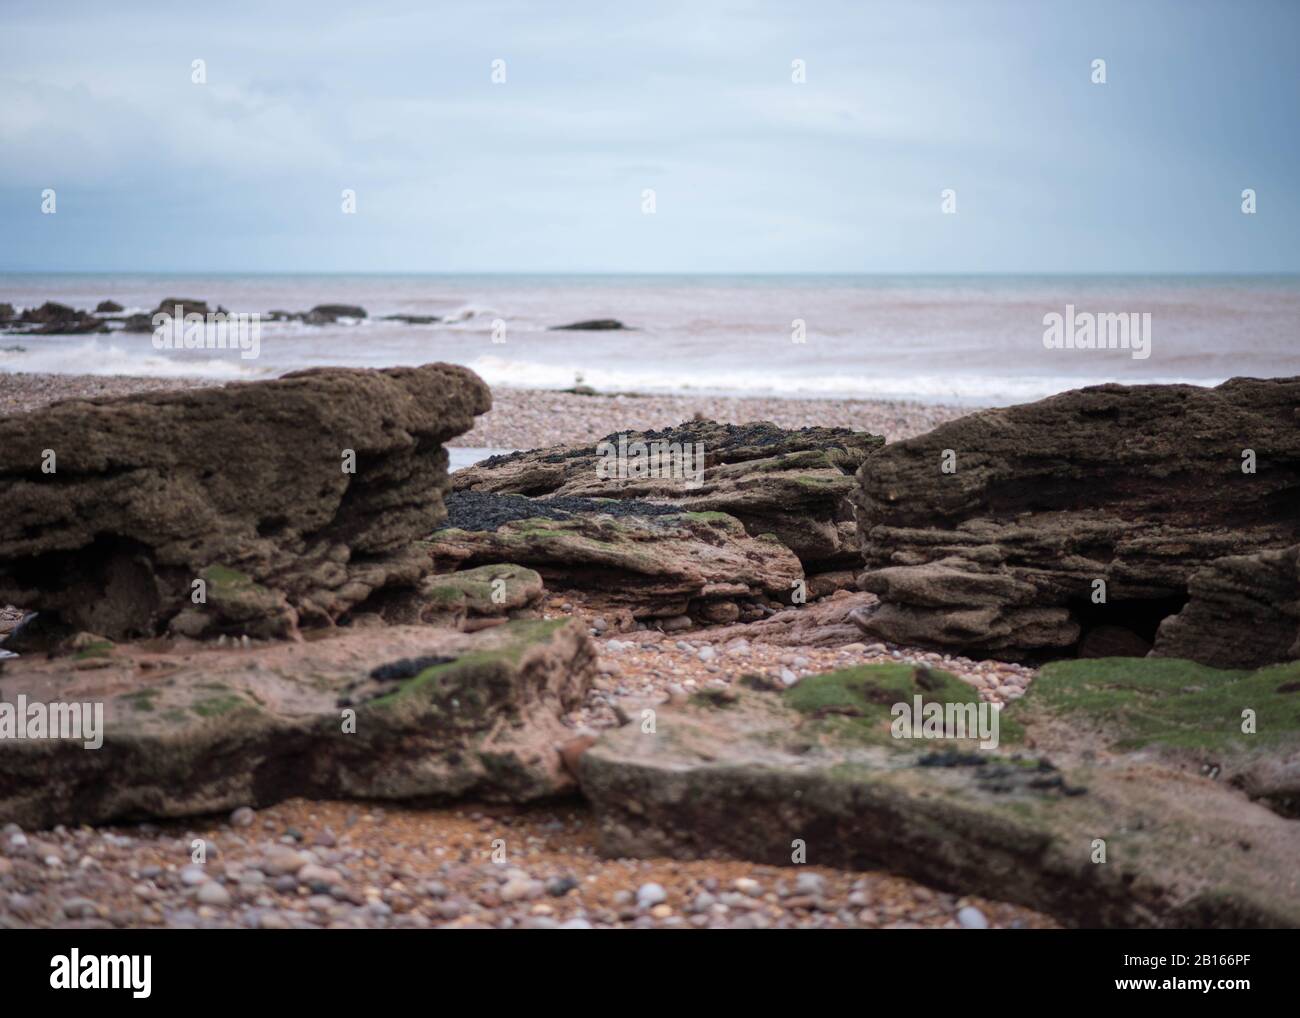 Rocks and Rock Pools at low tide at Budleigh Salterton in East Devon, England, UK - Cloudy Winter Day Stock Photo